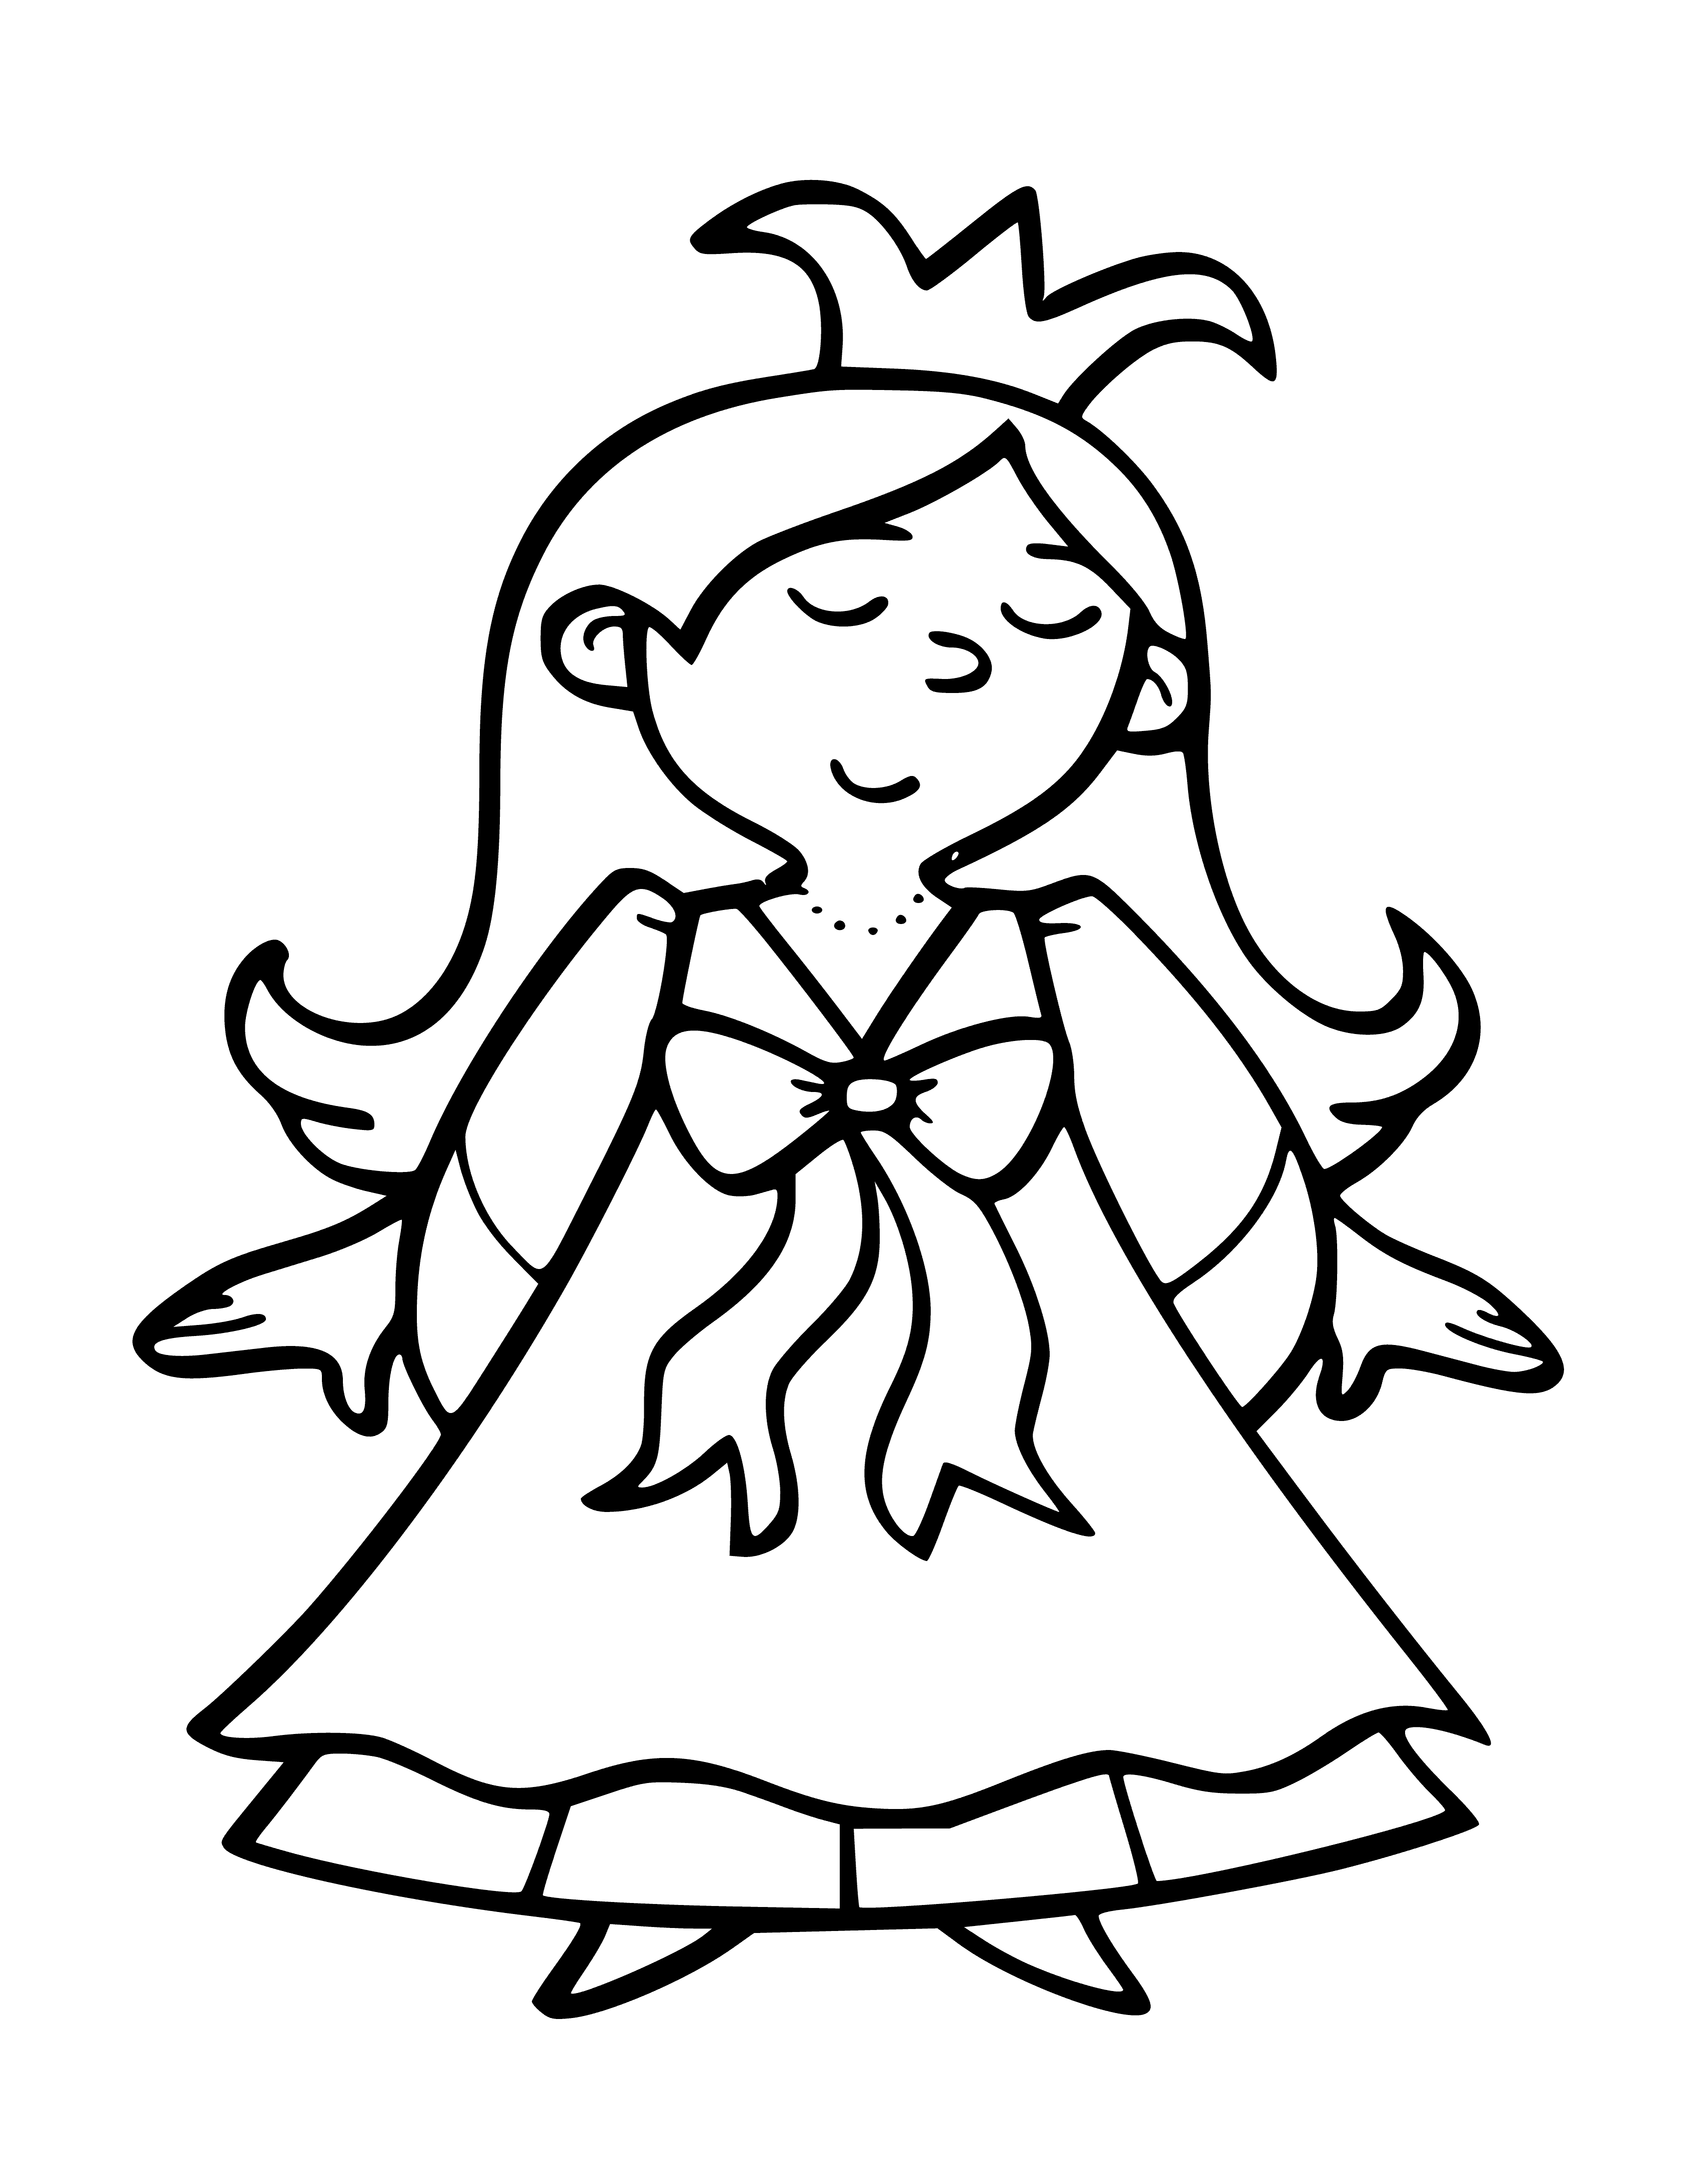 coloring page: A princess sits on a throne, surrounded by little people trying to gain her attention as she gazes off into the distance.